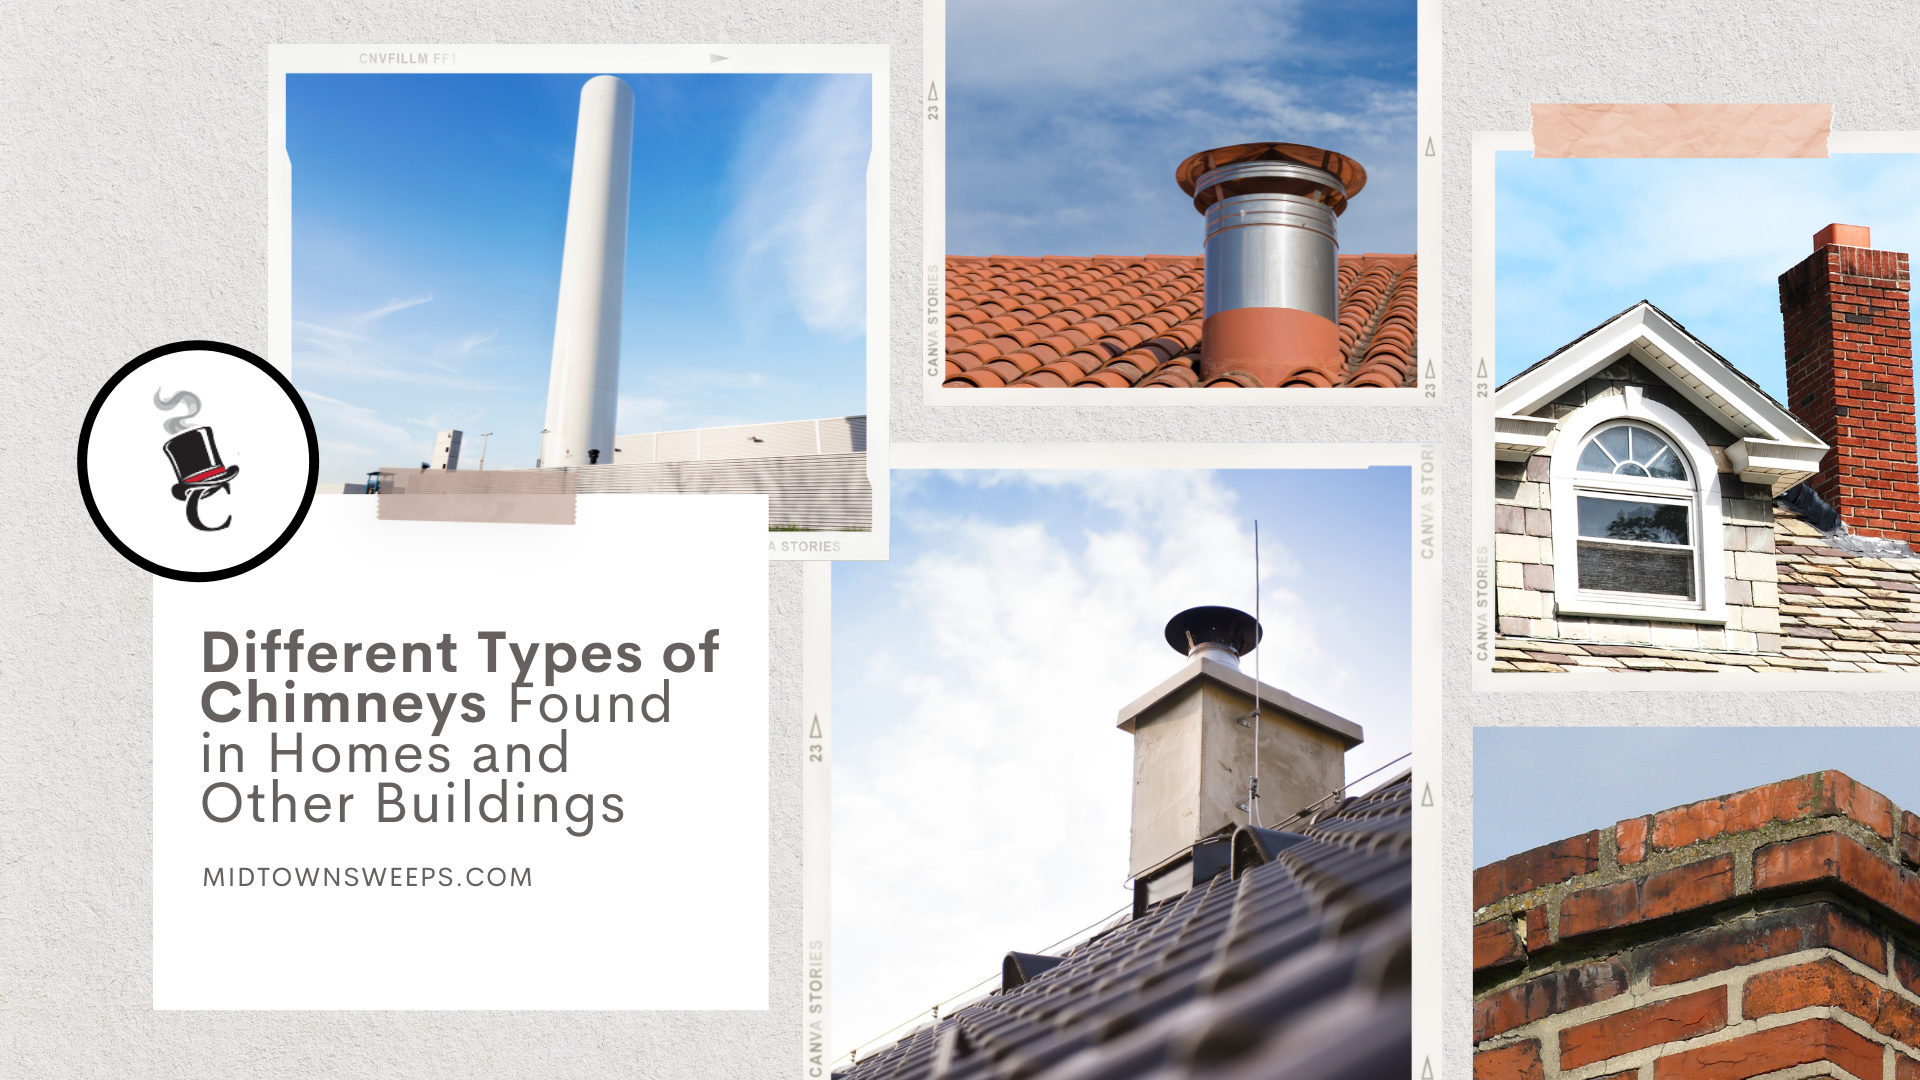 Different Types of Chimneys Found in Homes and Other Buildings